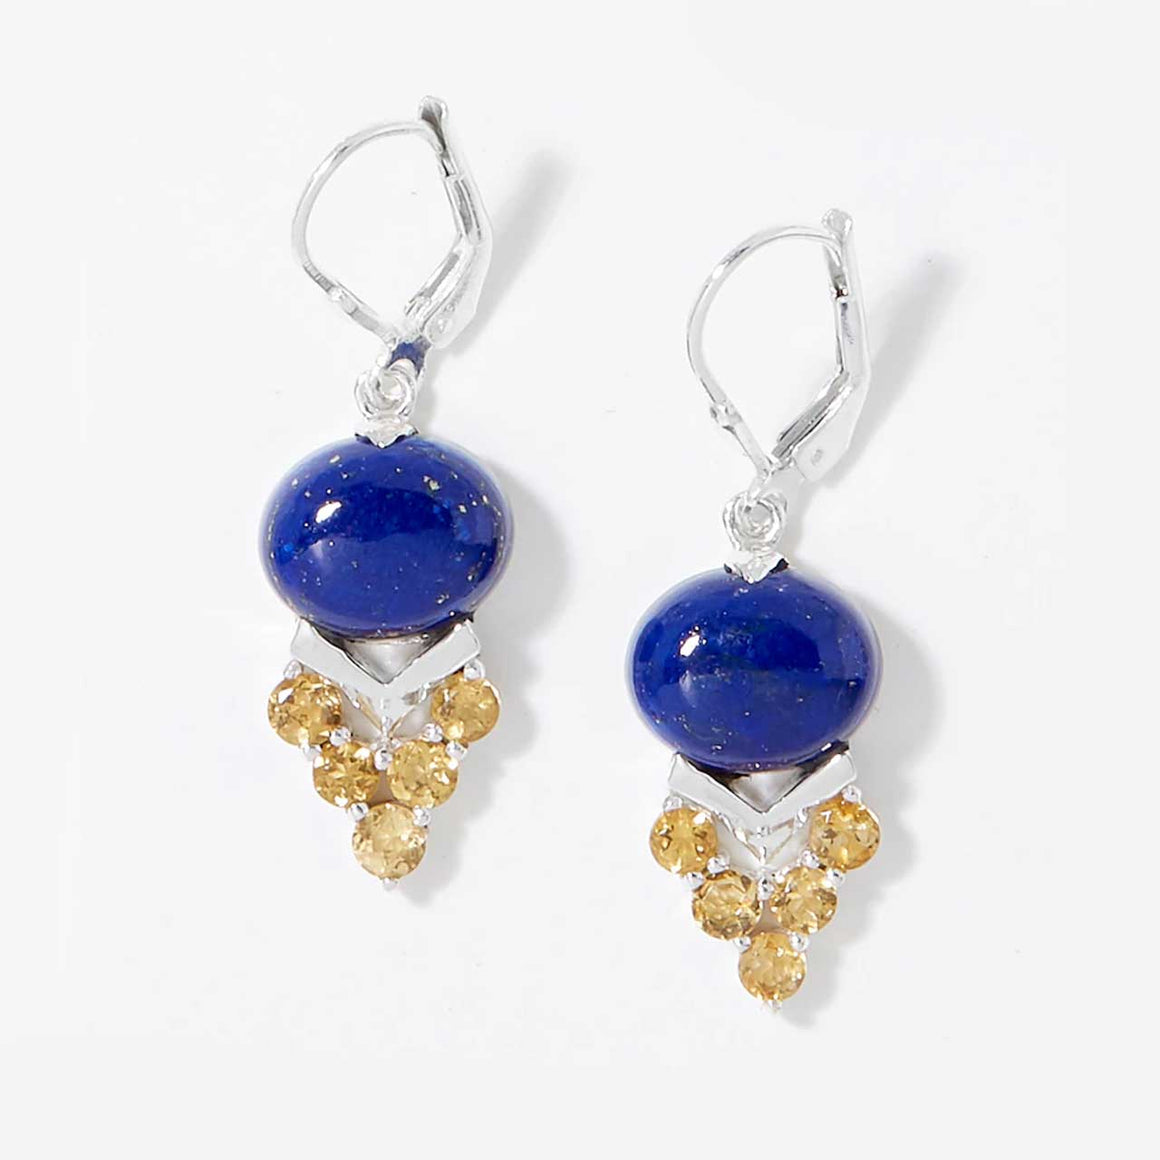 Lapis and Citrine Earrings